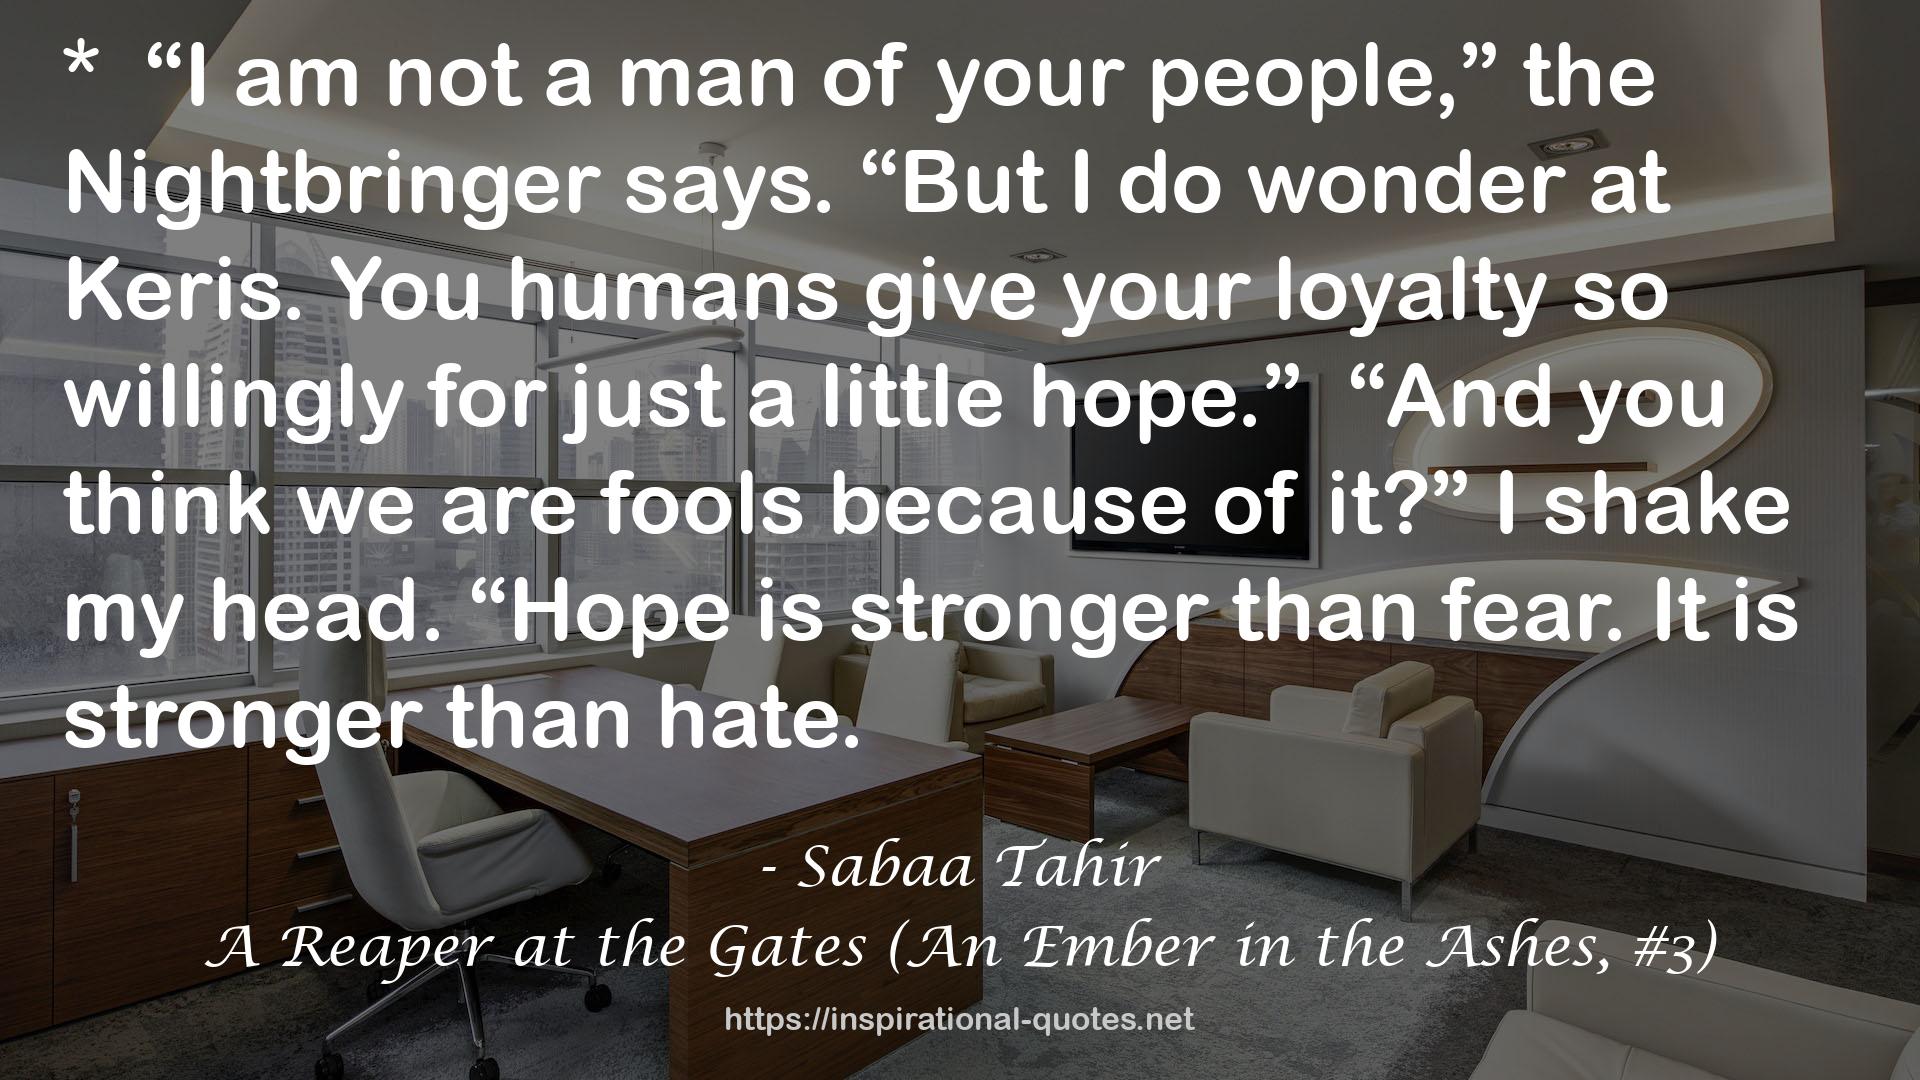 A Reaper at the Gates (An Ember in the Ashes, #3) QUOTES